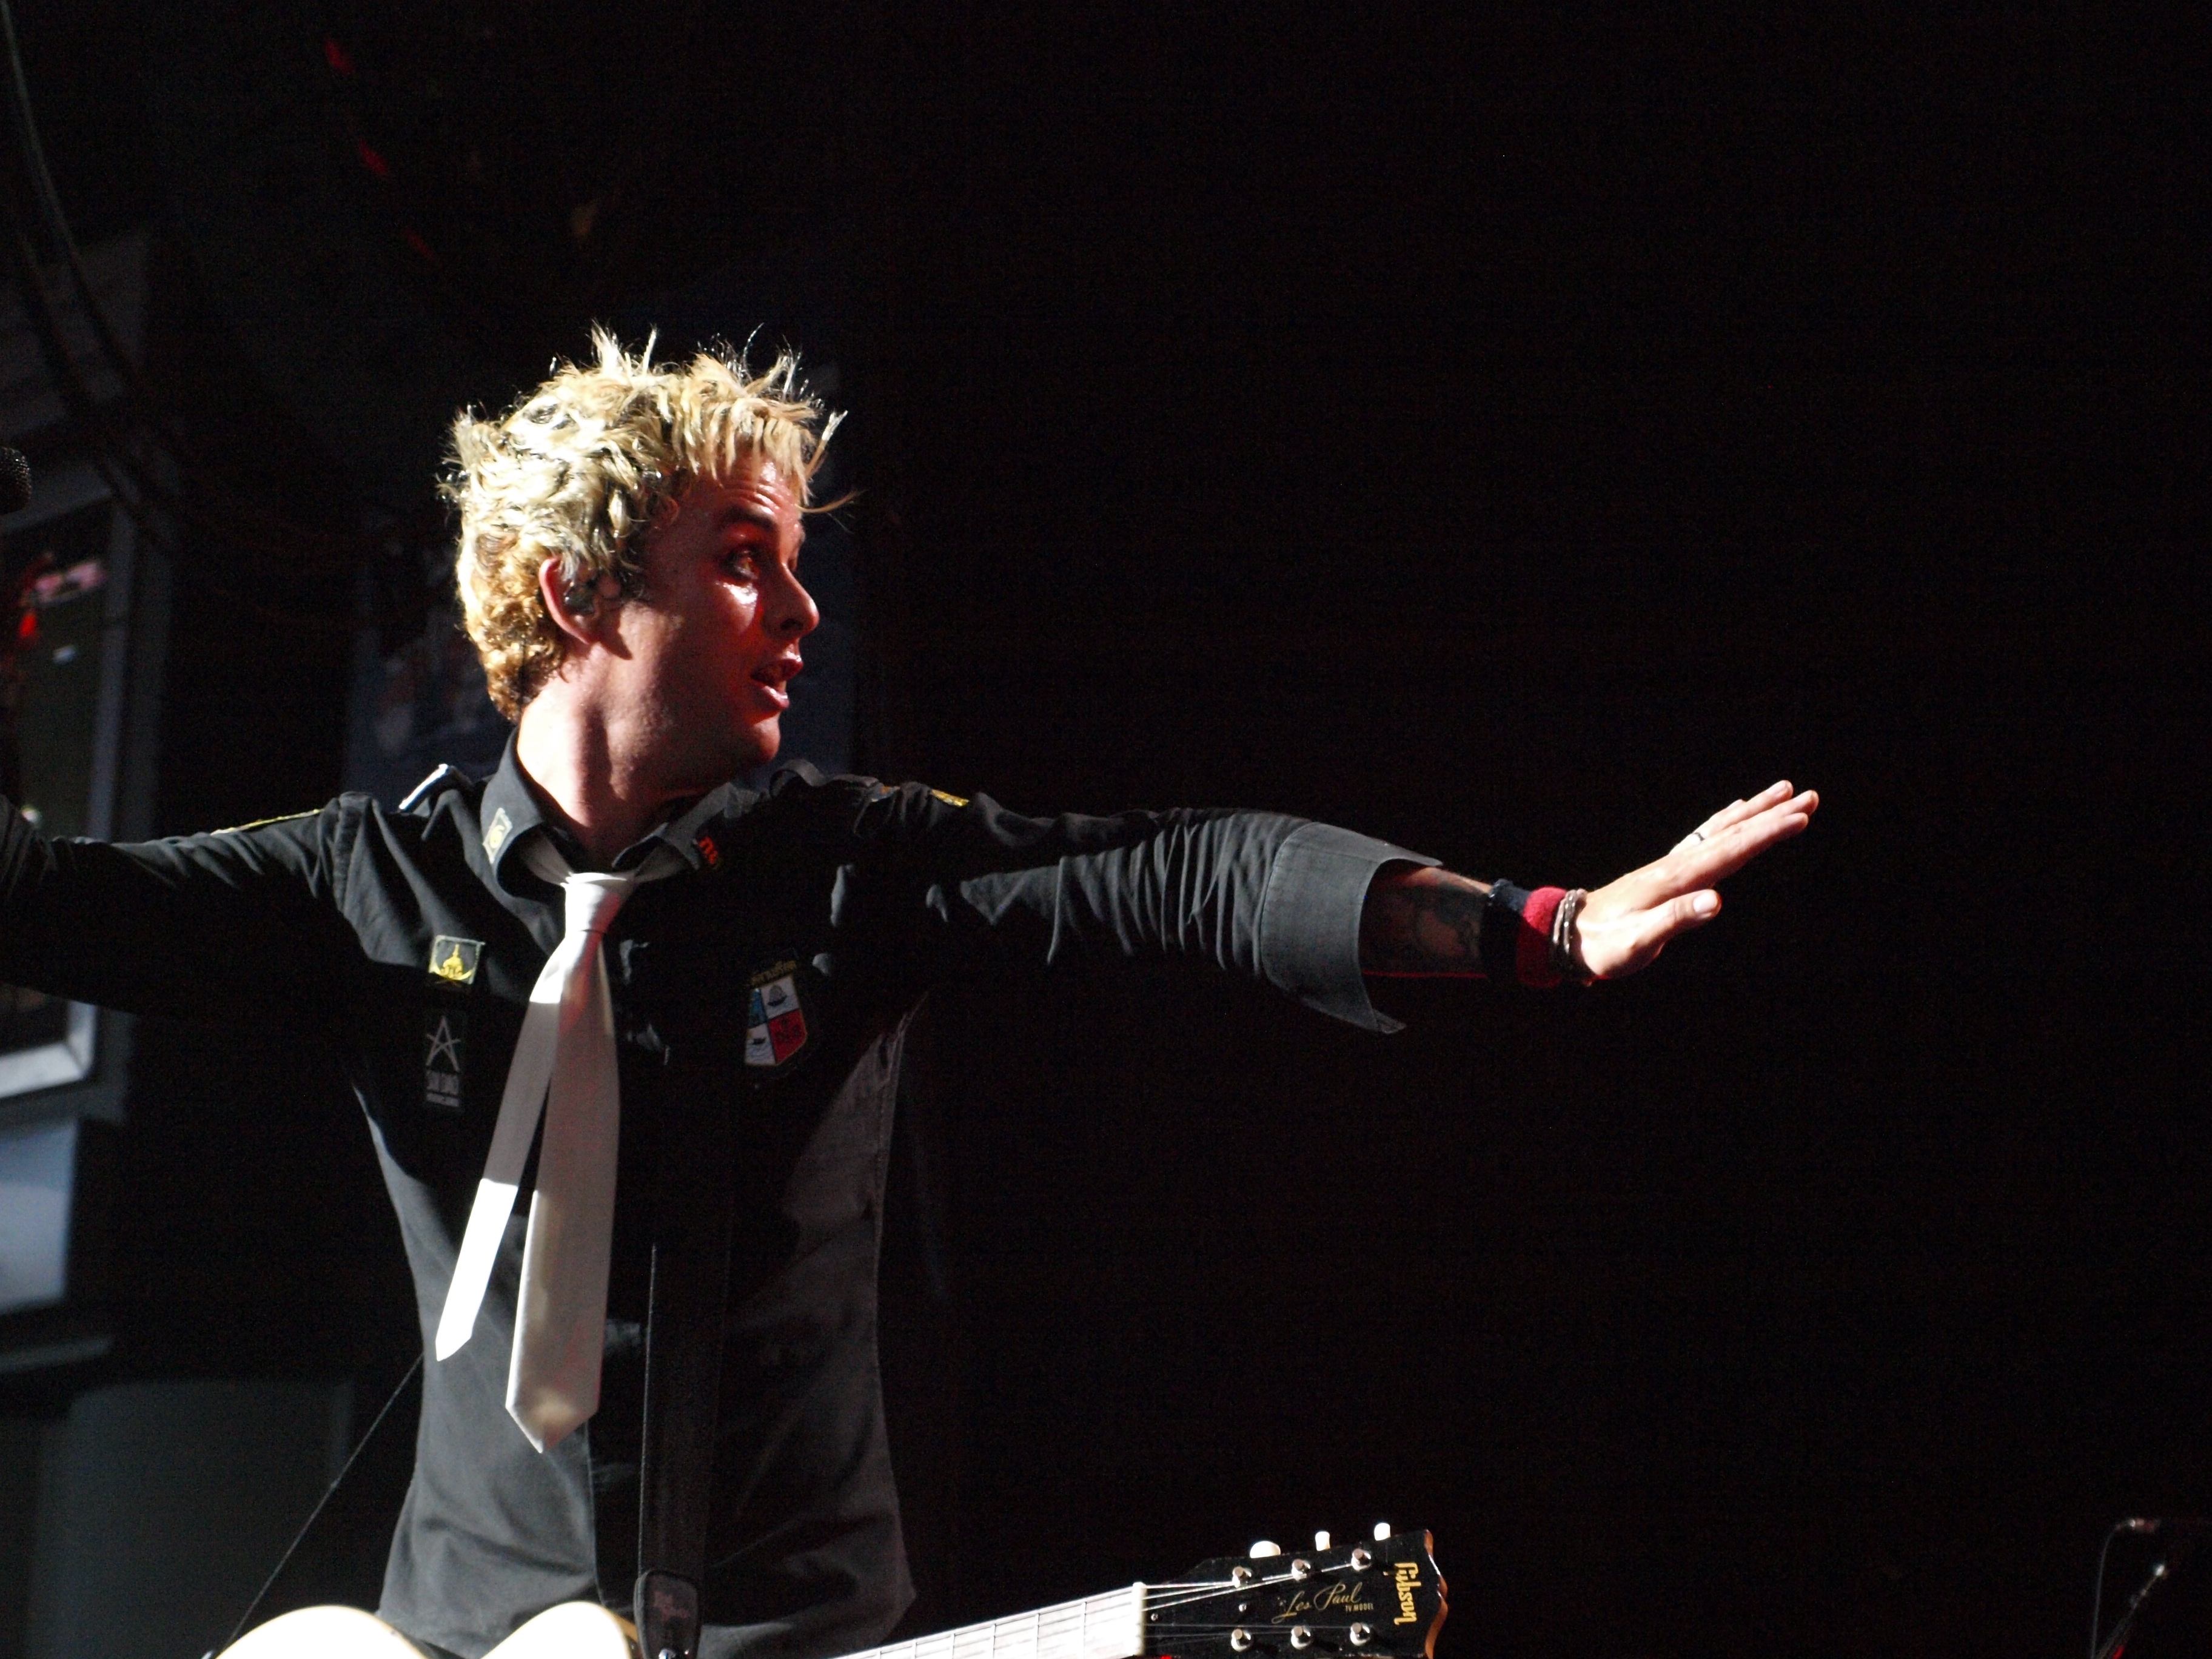 Billie Joe Armstrong and the guys of Green Day will release a special, 25th anniversary edition of "Insomniac" next year.